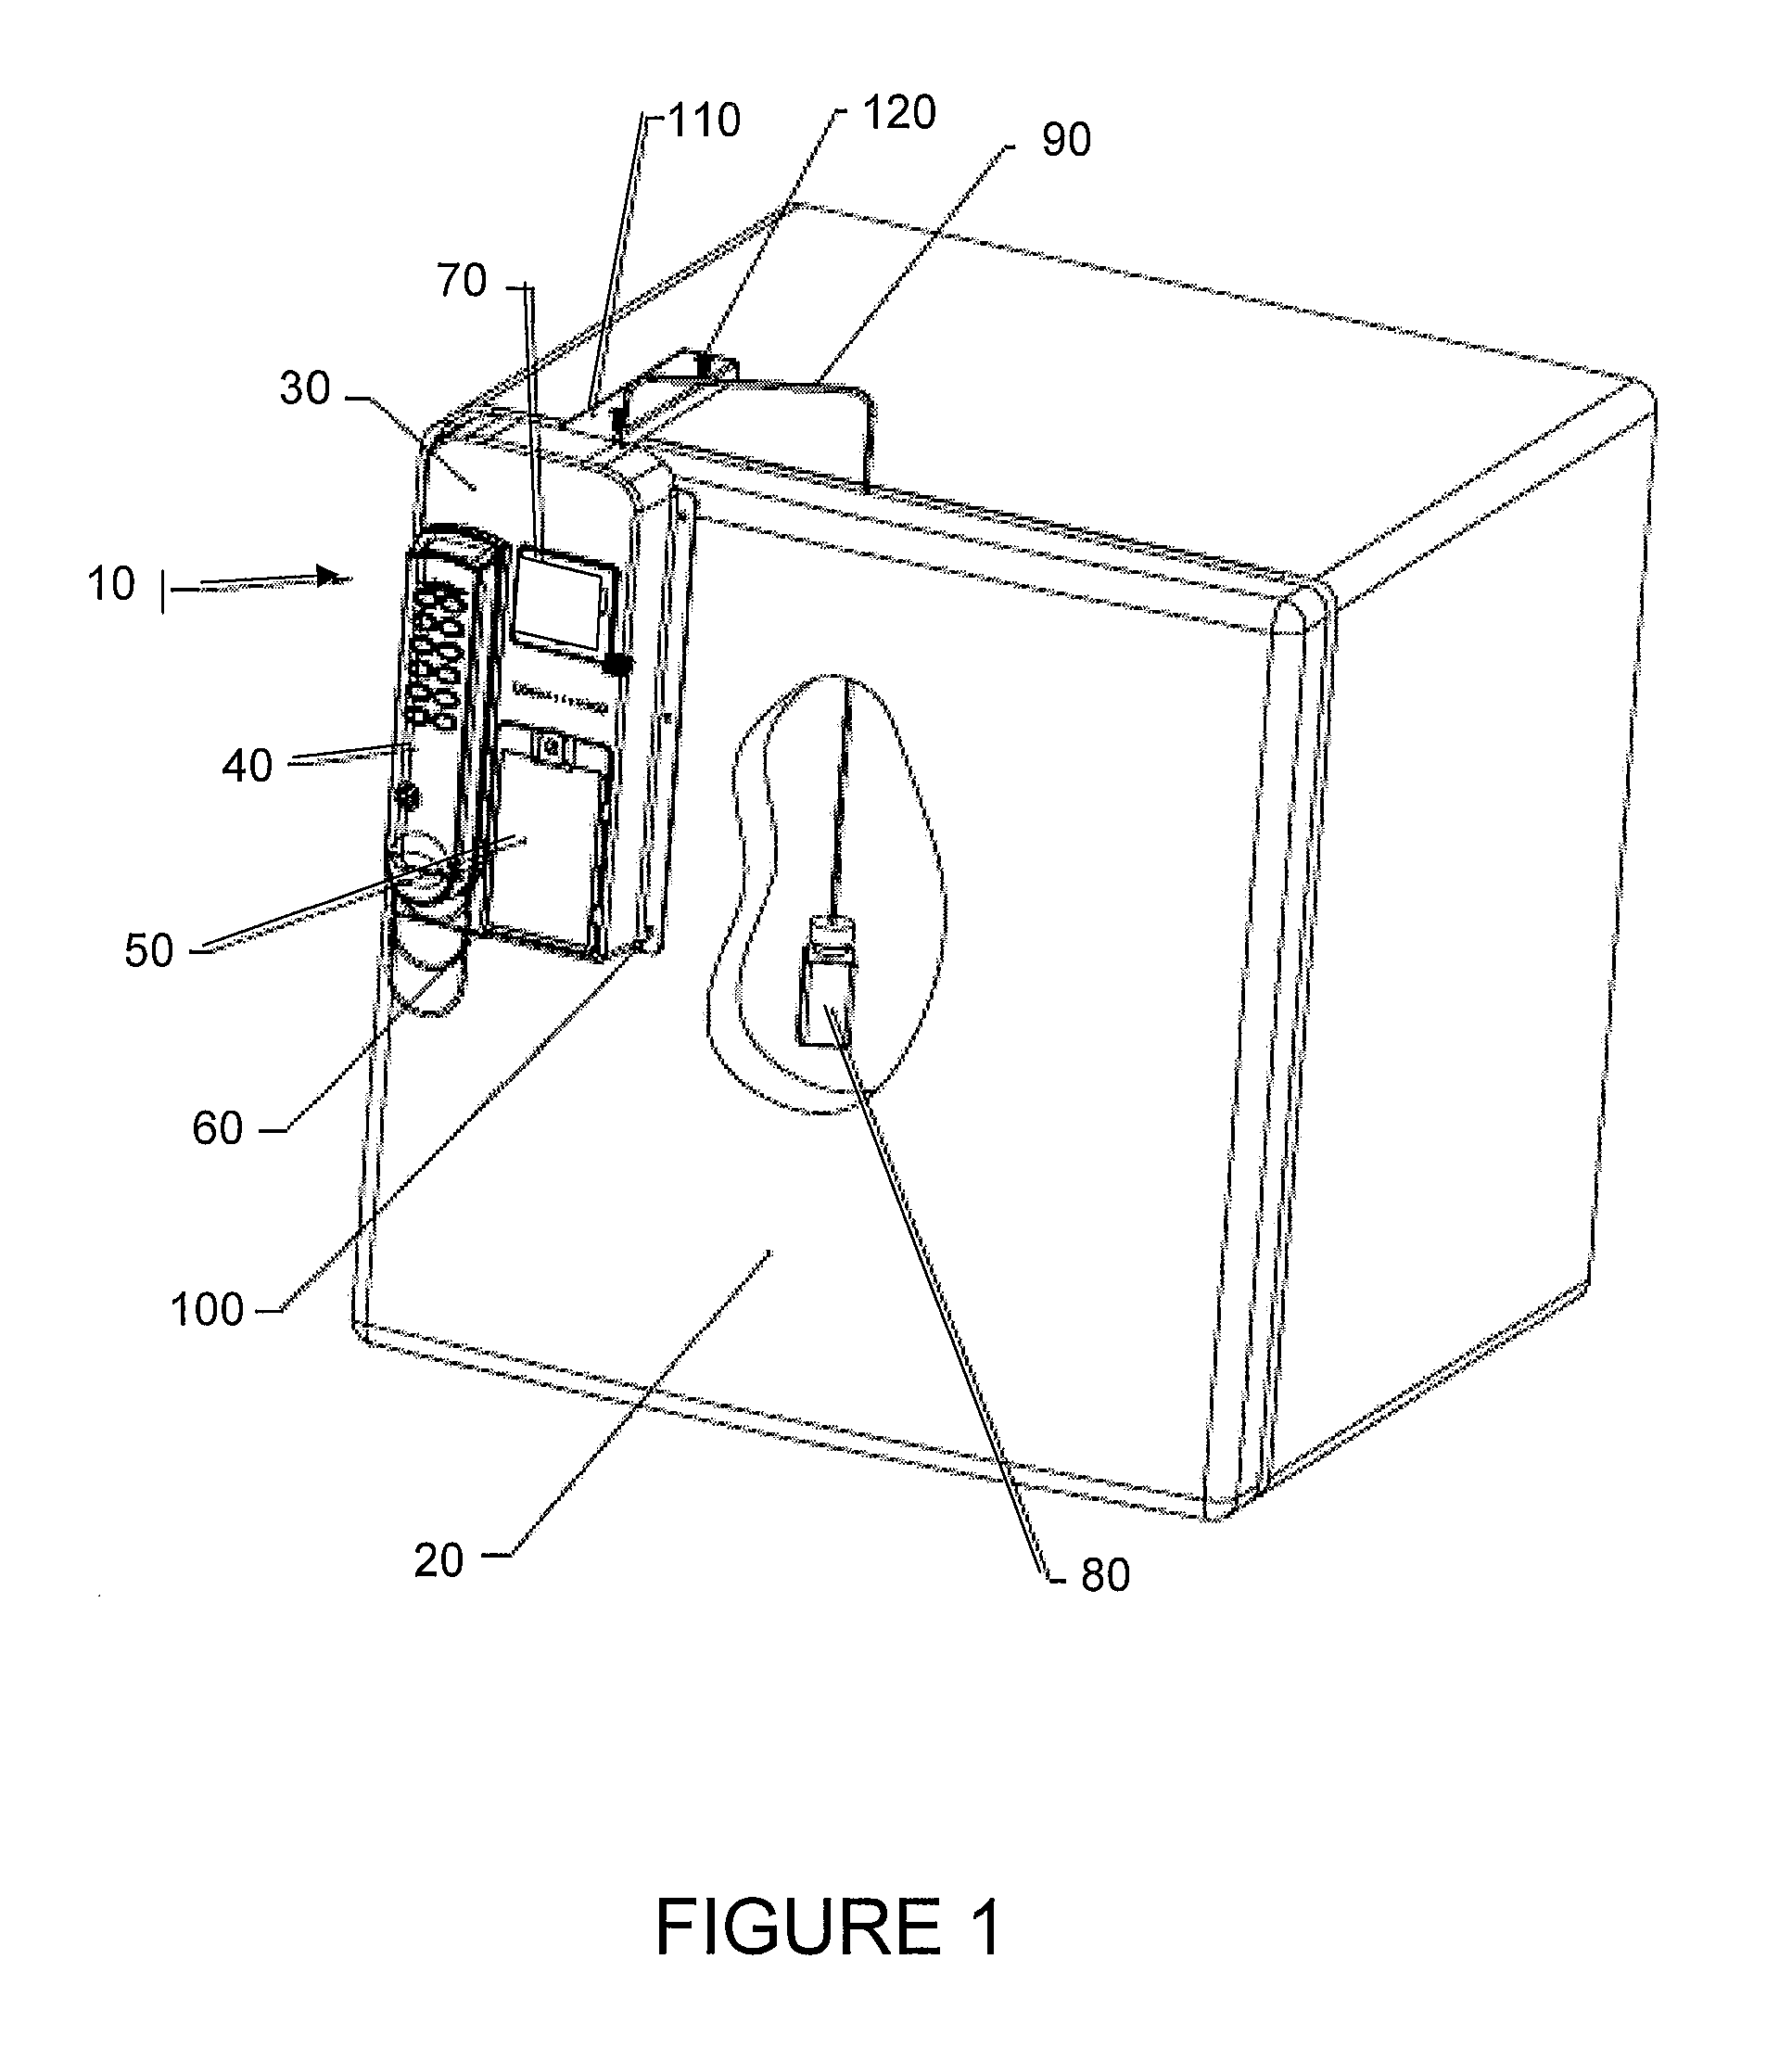 Apparatus and method for electronic access control